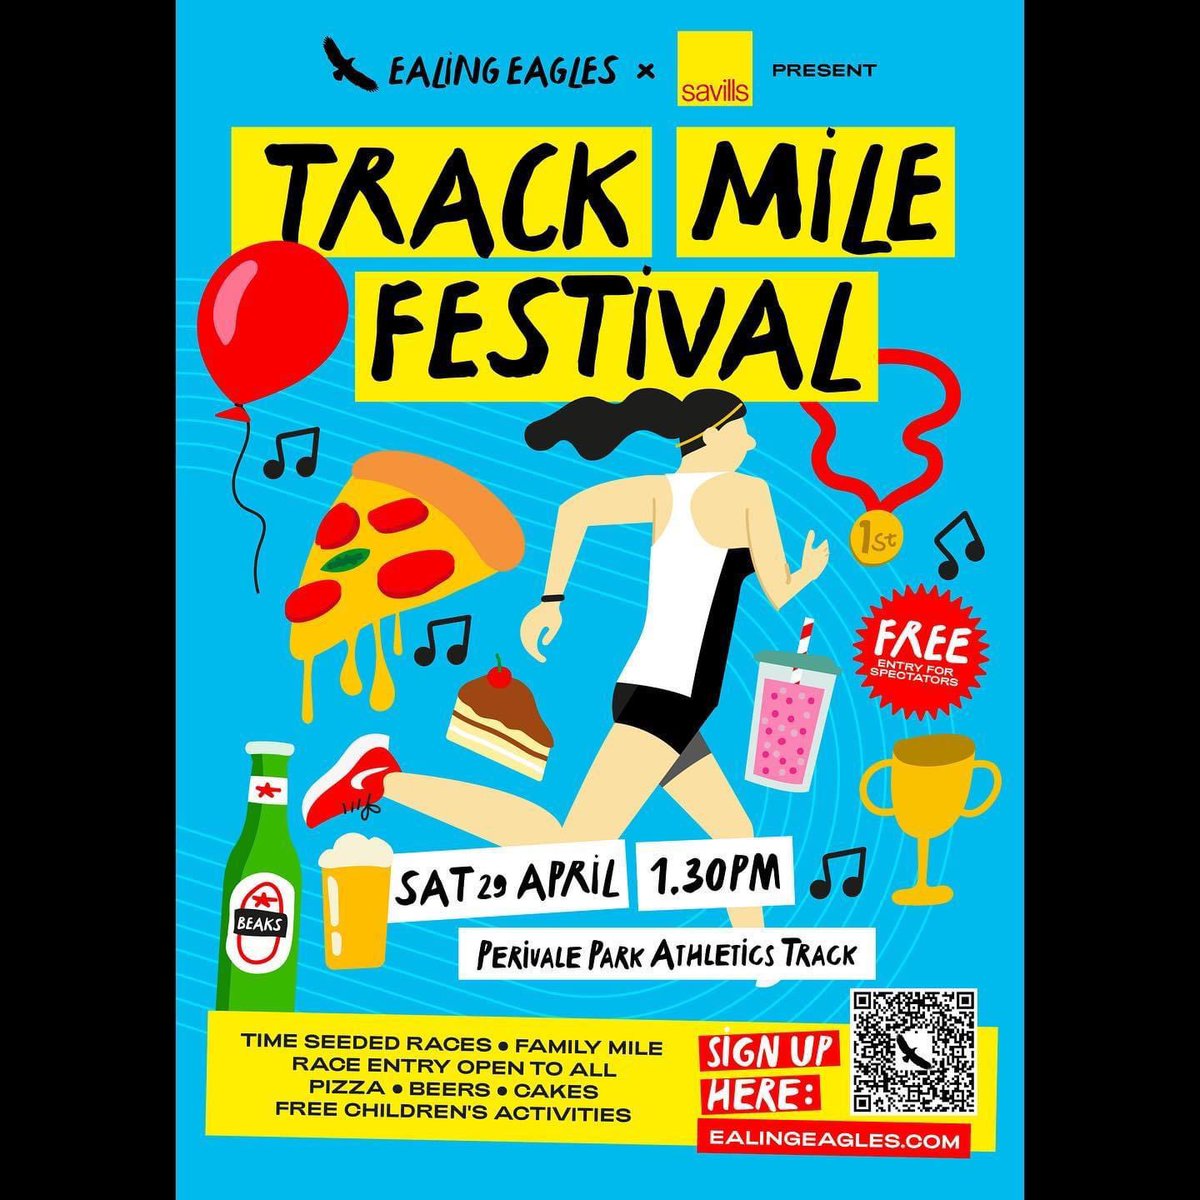 Entries now open for the Track Mile Festival by Ealing Eagles x Savills. Sign up to race at ealingeagles.com/track-mile-fes… Artwork by our very own Ben Smith